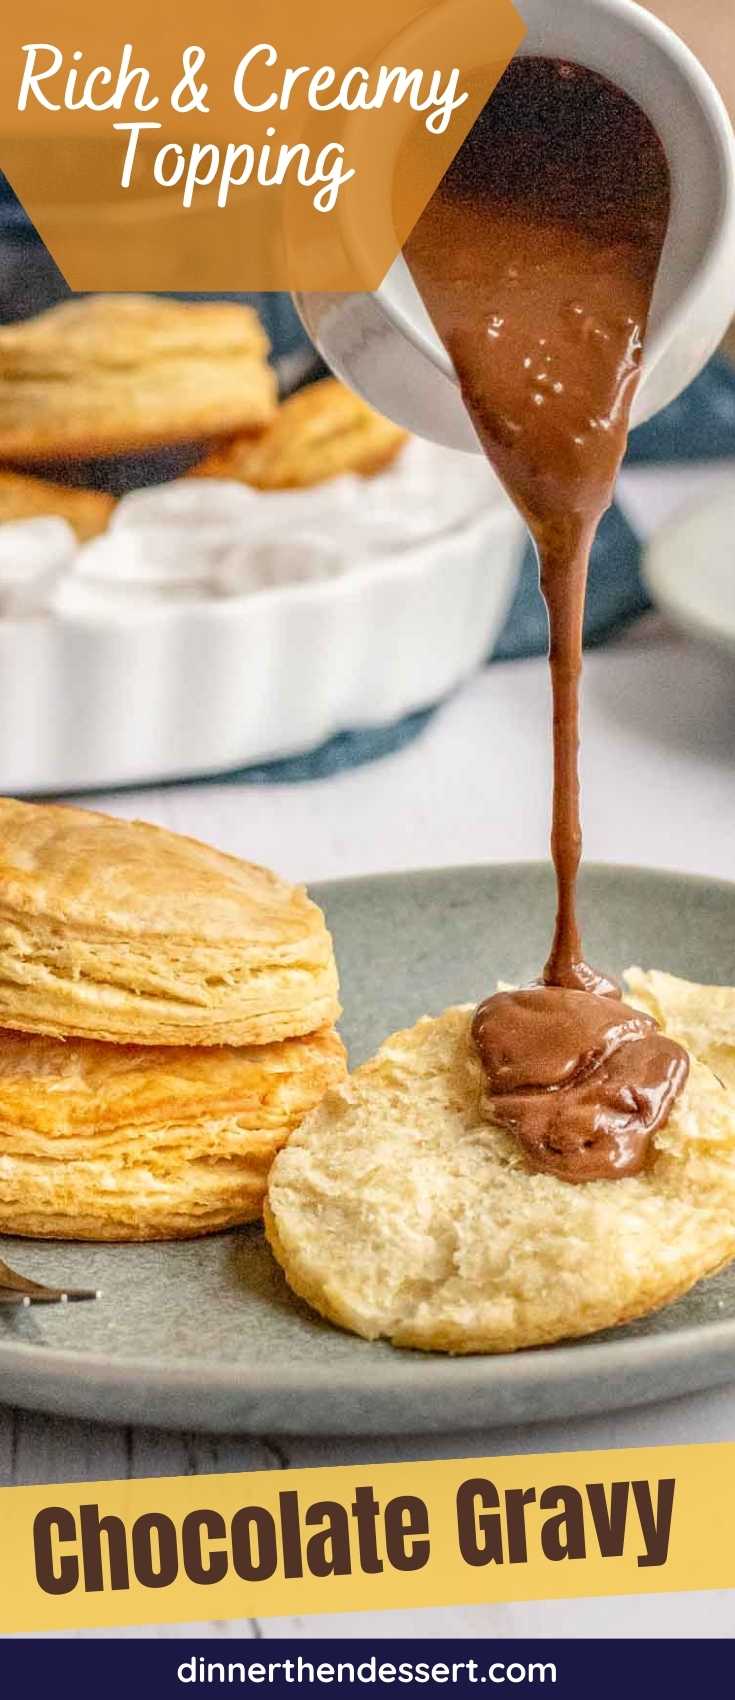 Chocolate gravy being poured over biscuit.